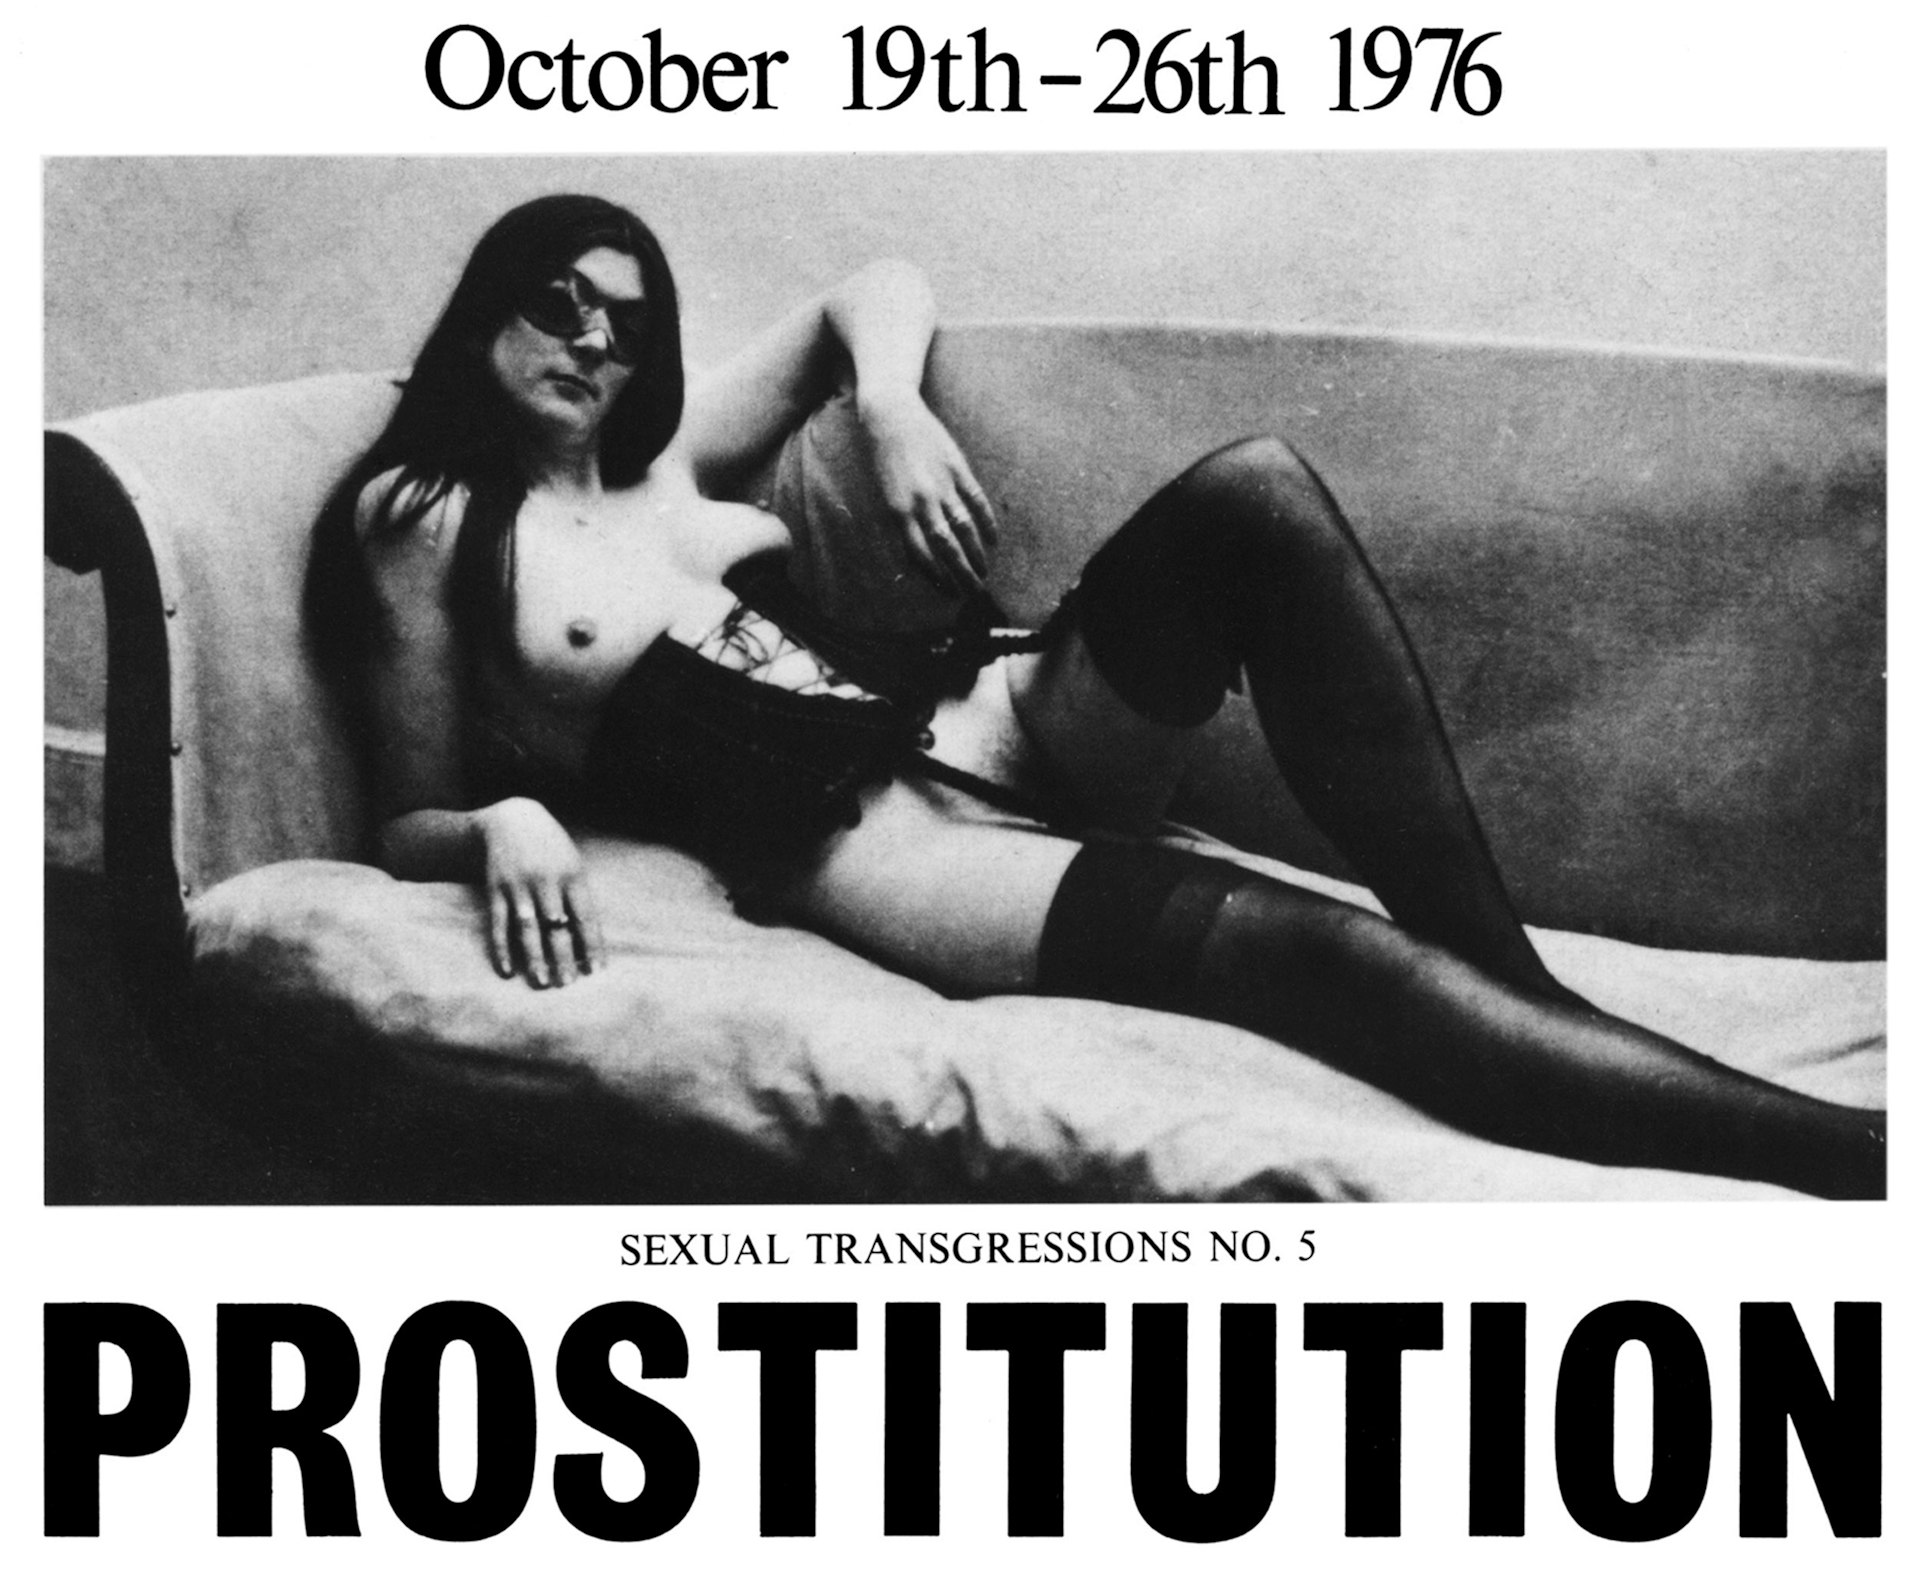 Exhibition poster for 'Prostitution' at London's ICA, 1976.